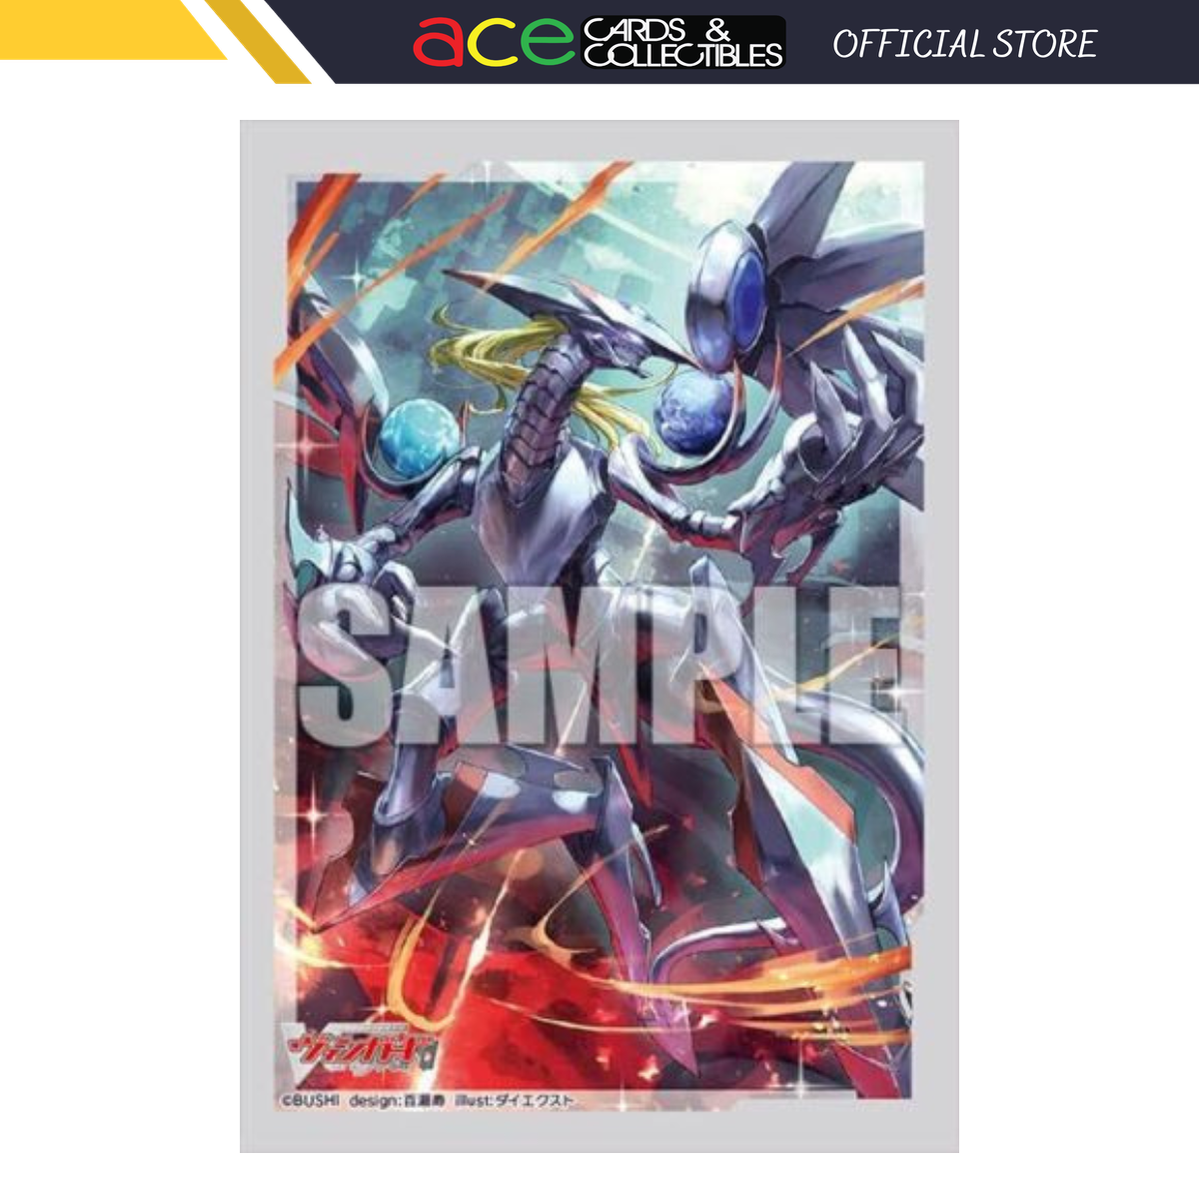 Bushiroad Mini Sleeves Cardfight Vanguard "Alter Ego Messiah" Part.2 Vol.634-Bushiroad-Ace Cards & Collectibles